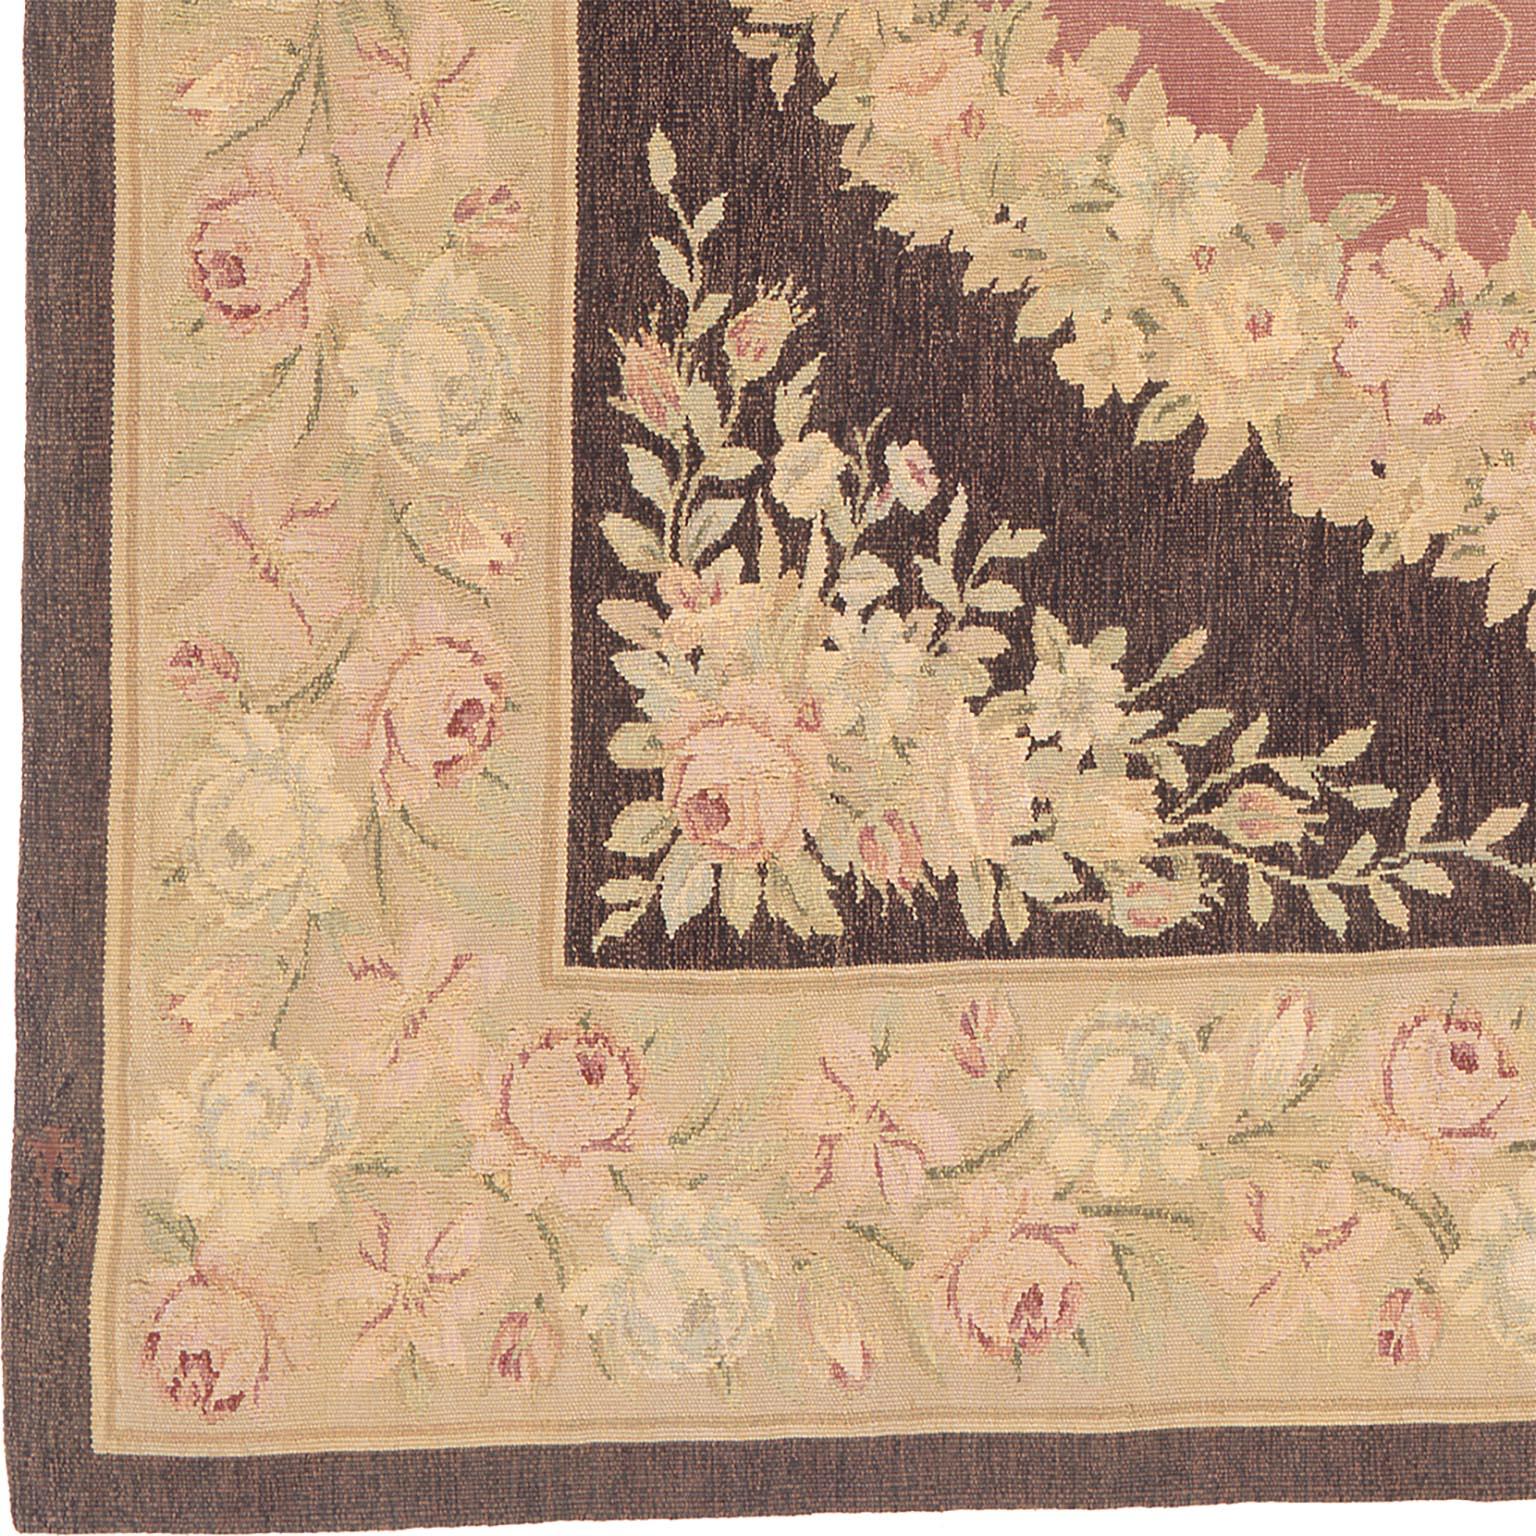 Early-20th Century, French, Aubusson Rug In Good Condition For Sale In New York, NY